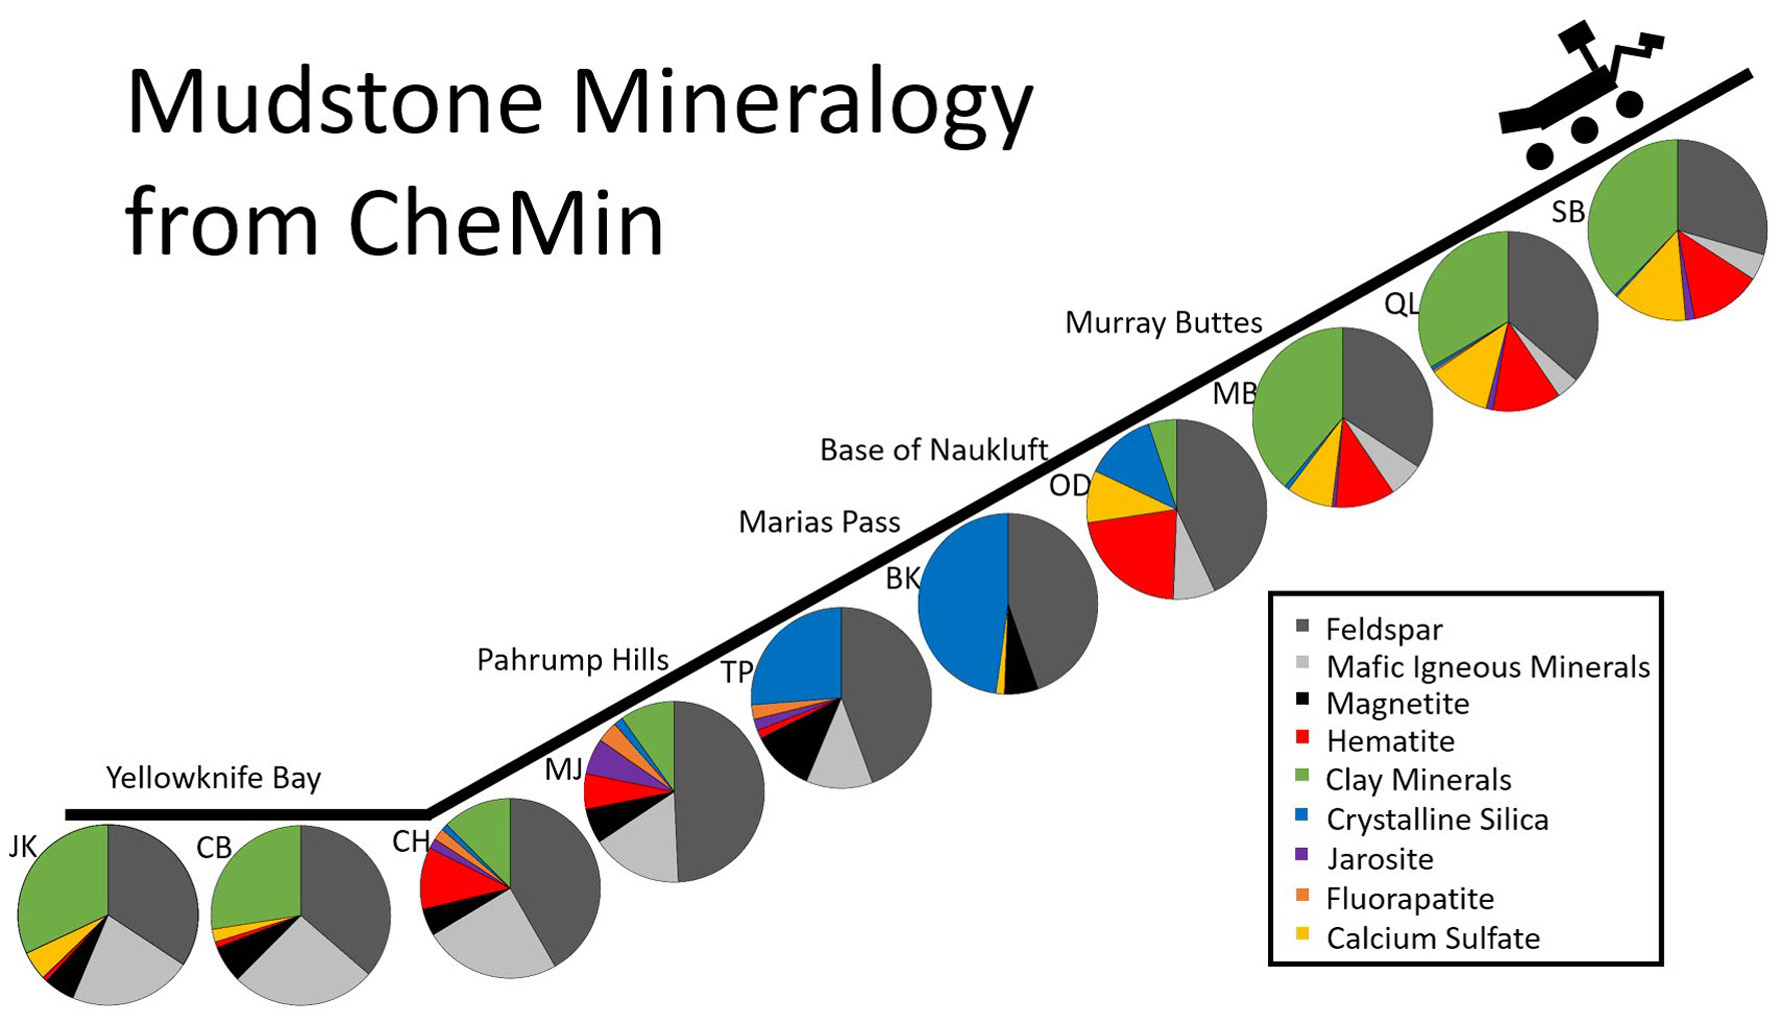 Illustration of the mudstone mineralogy from the CheMIn instrument during Curiosity's travels from 2013-2016. Image Credit: NASA/JPL-Caltech